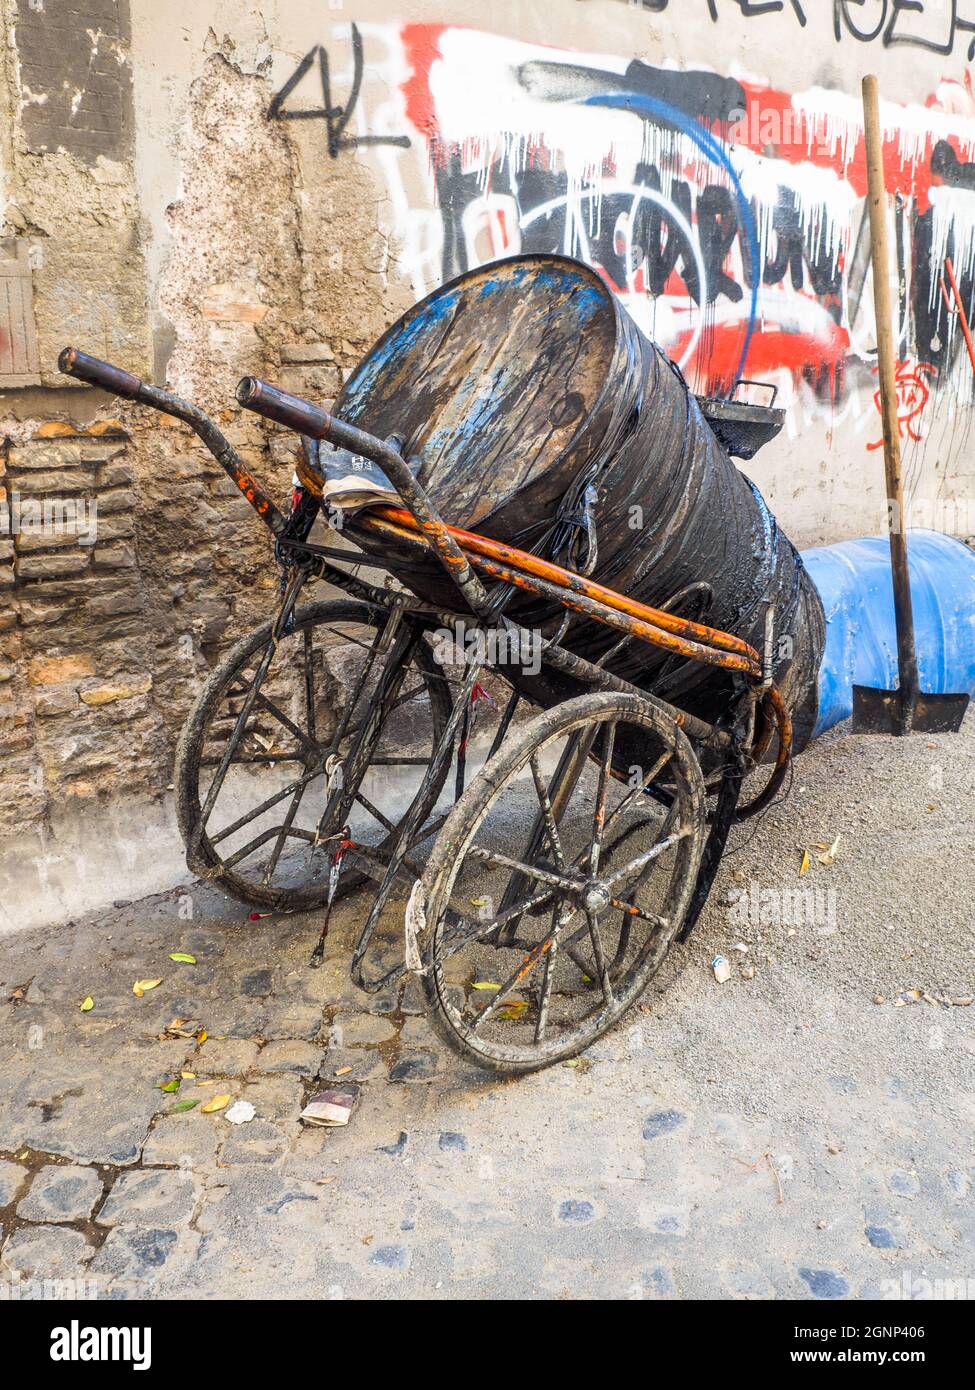 A bin full of tar over on a handcart - Rome, Italy Stock Photo